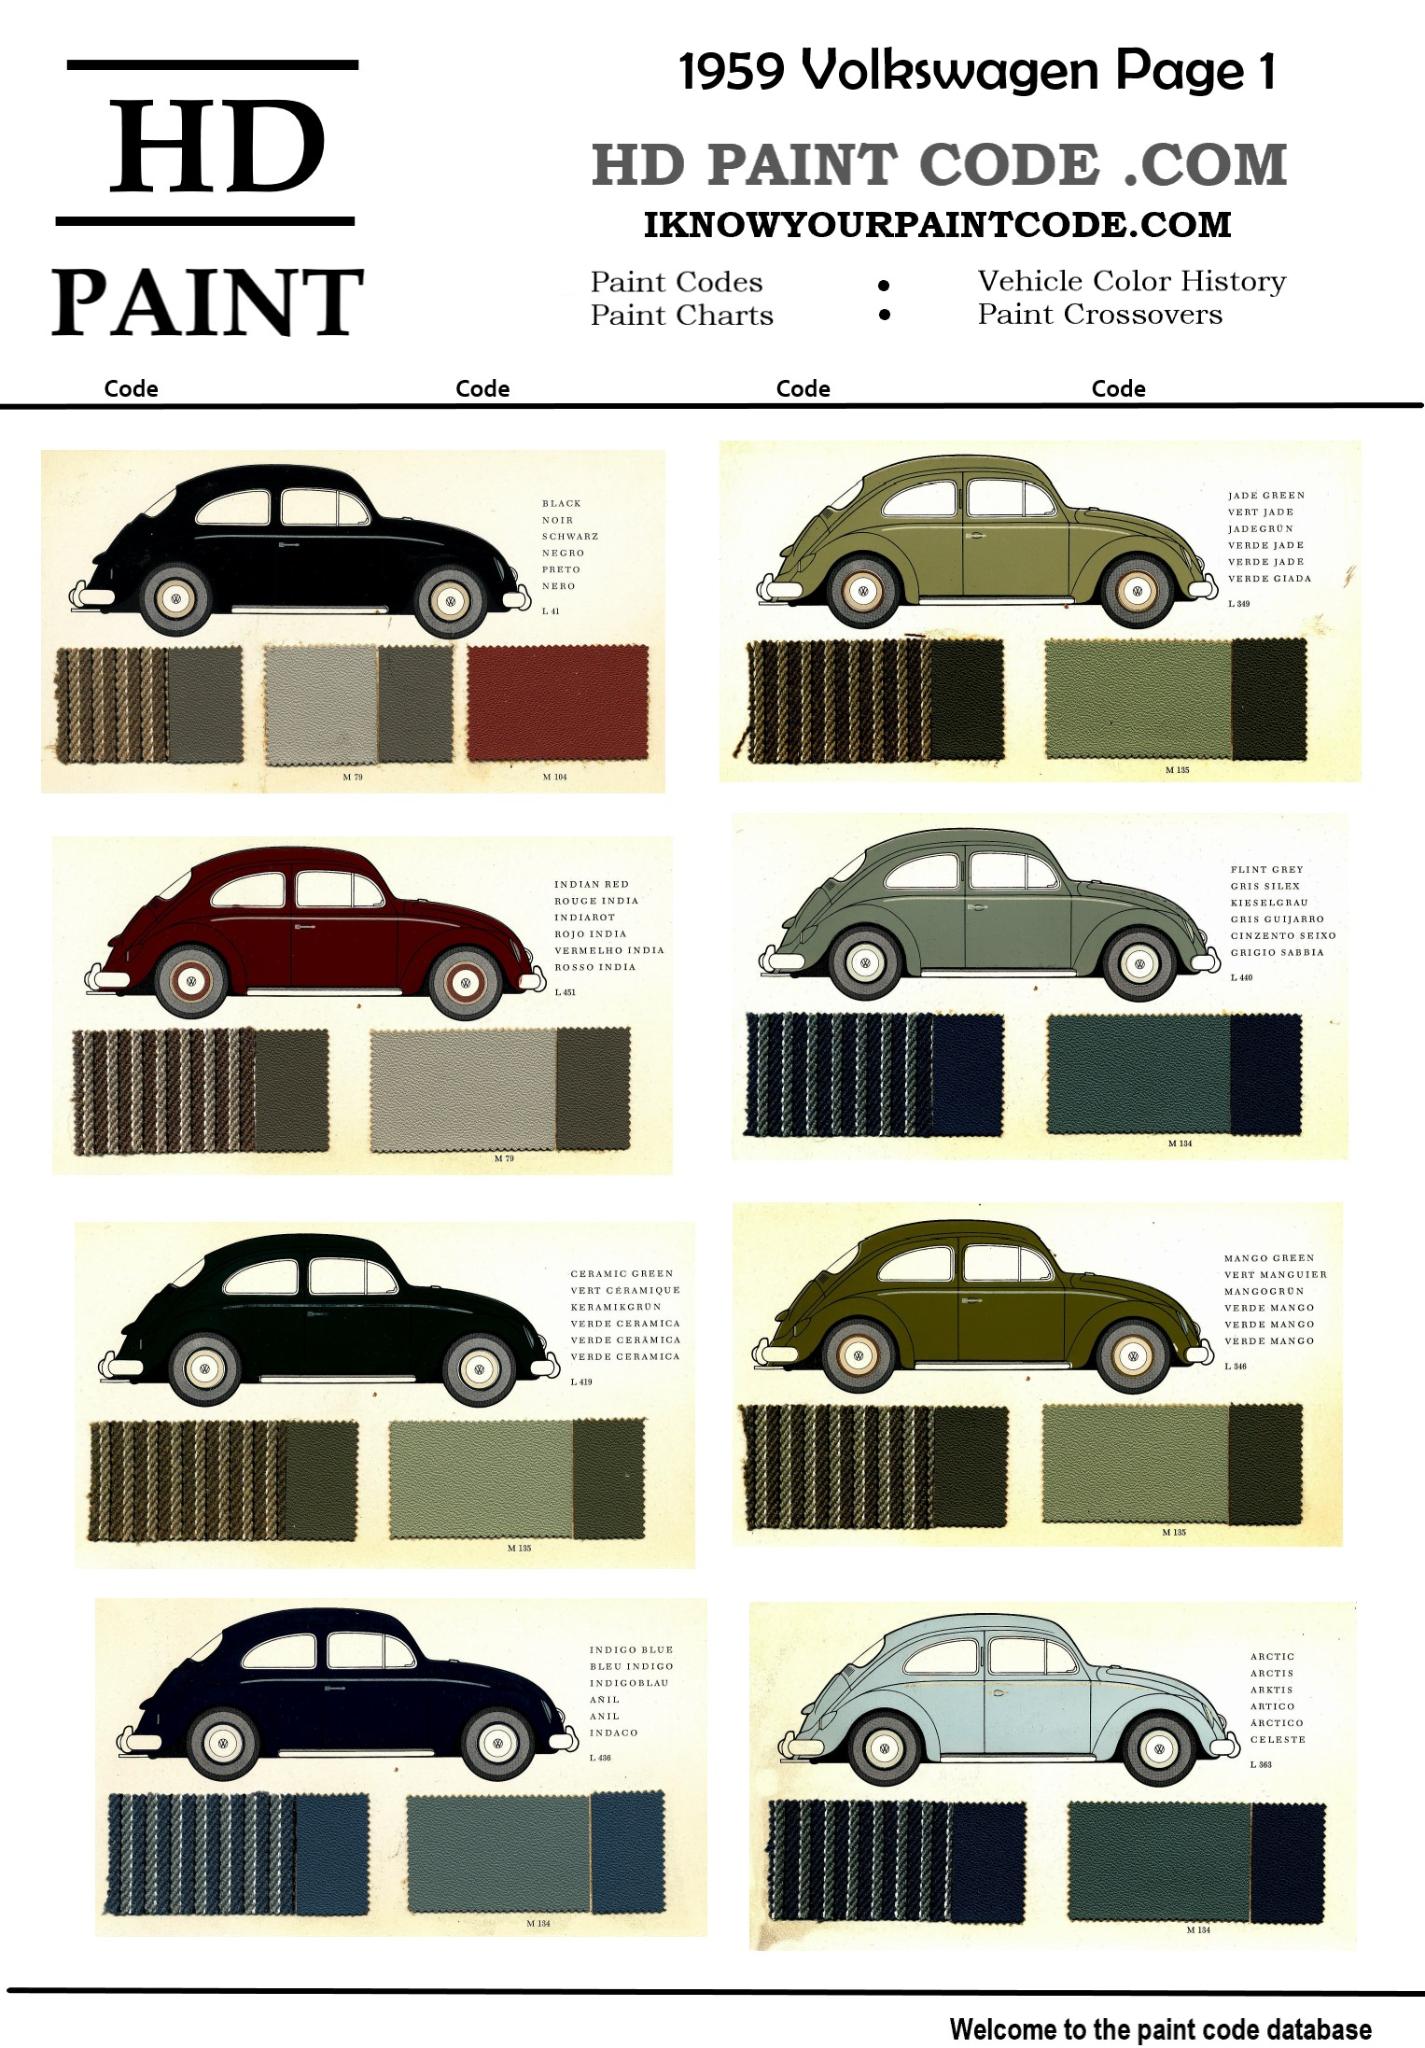  1959 Volkswagen Interior and Exterior Colors and codes